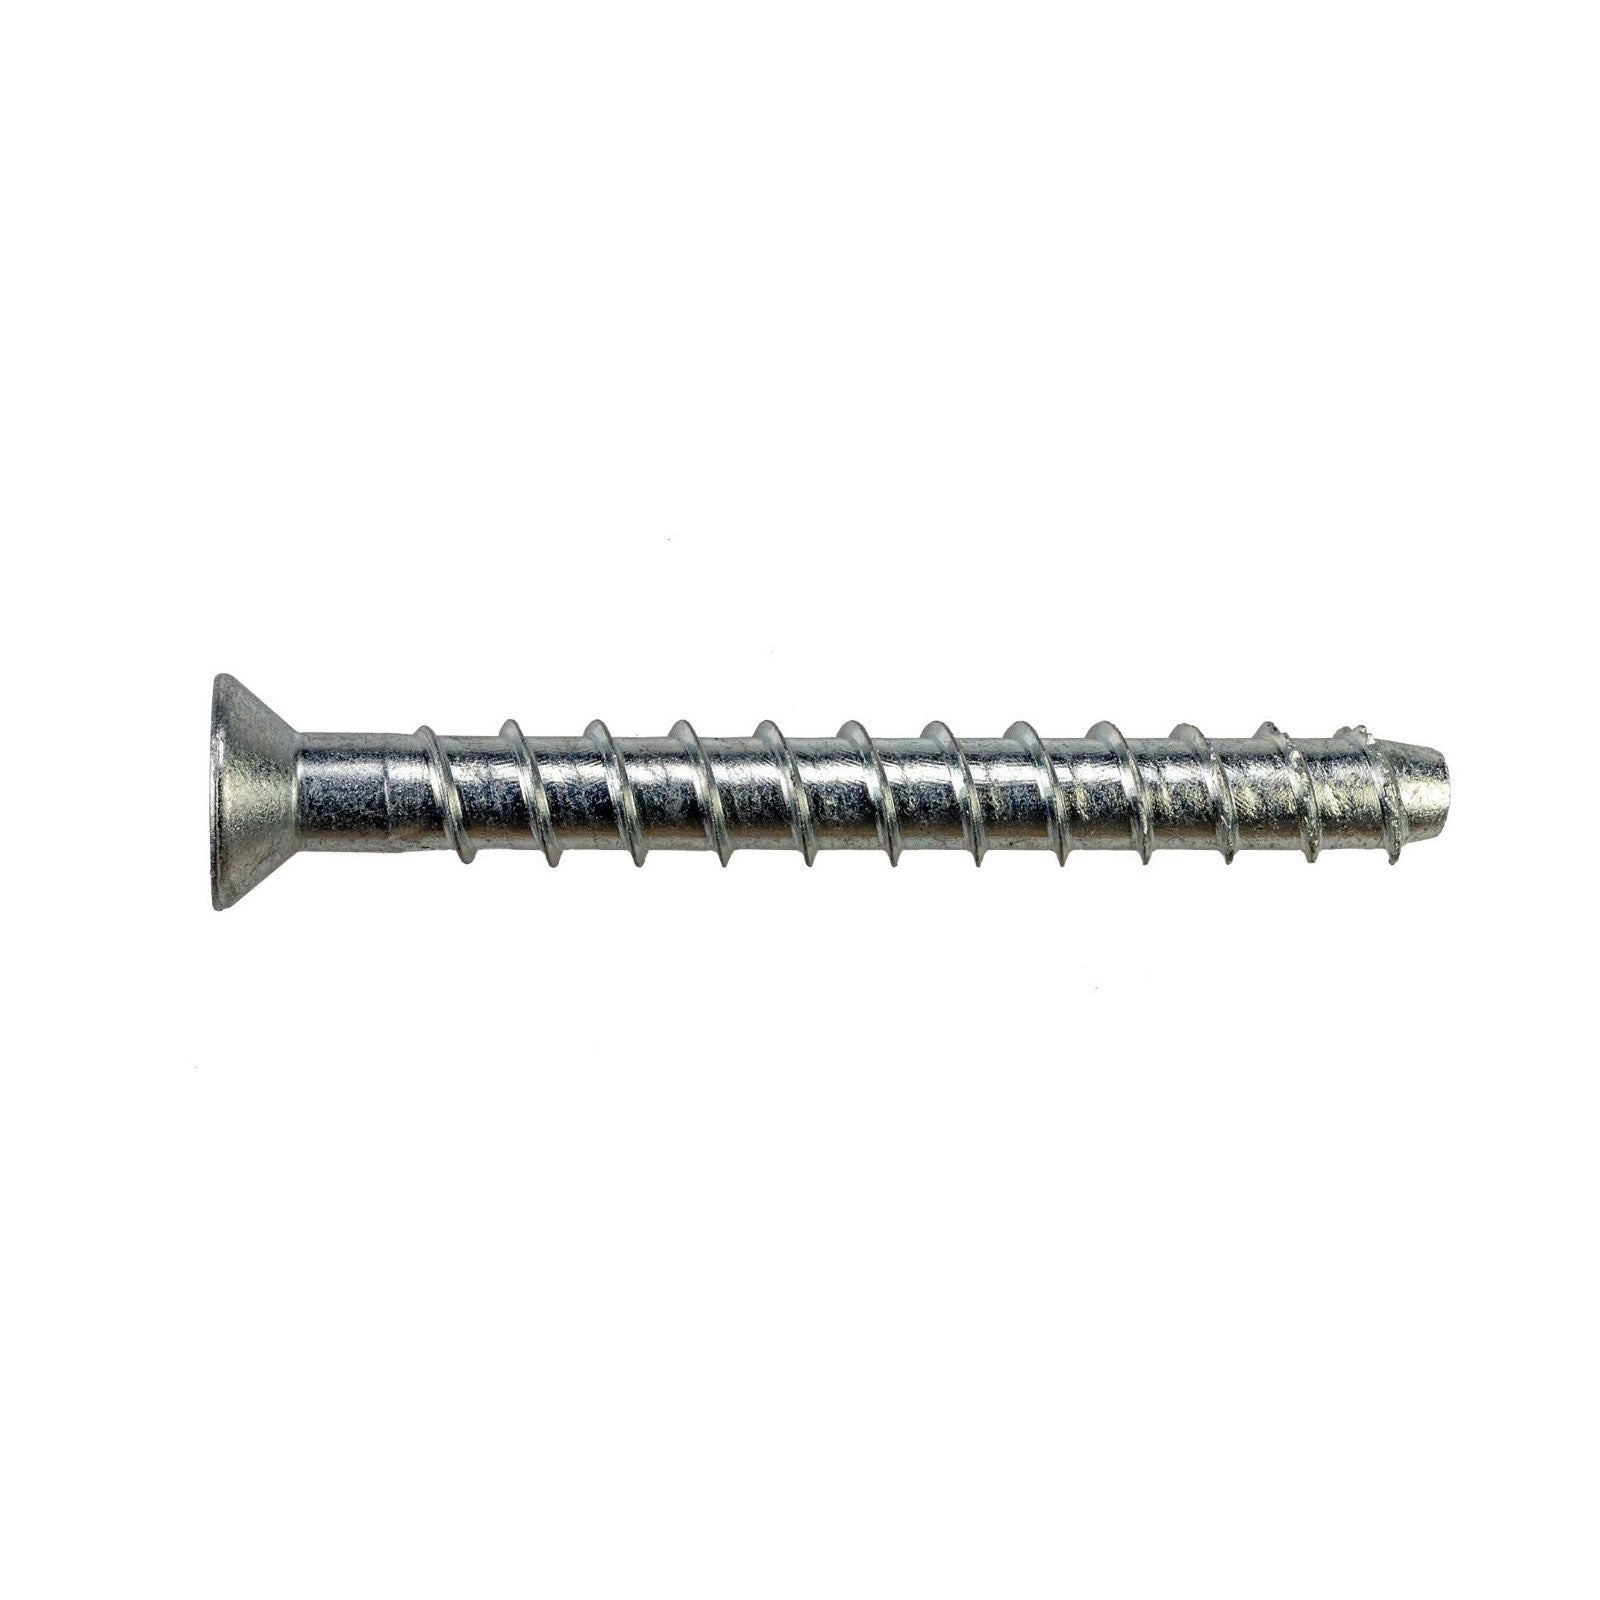 1/4" x 2 3/8" Strong-Tie Countersunk Titen HD Anchor - 316 Stainless